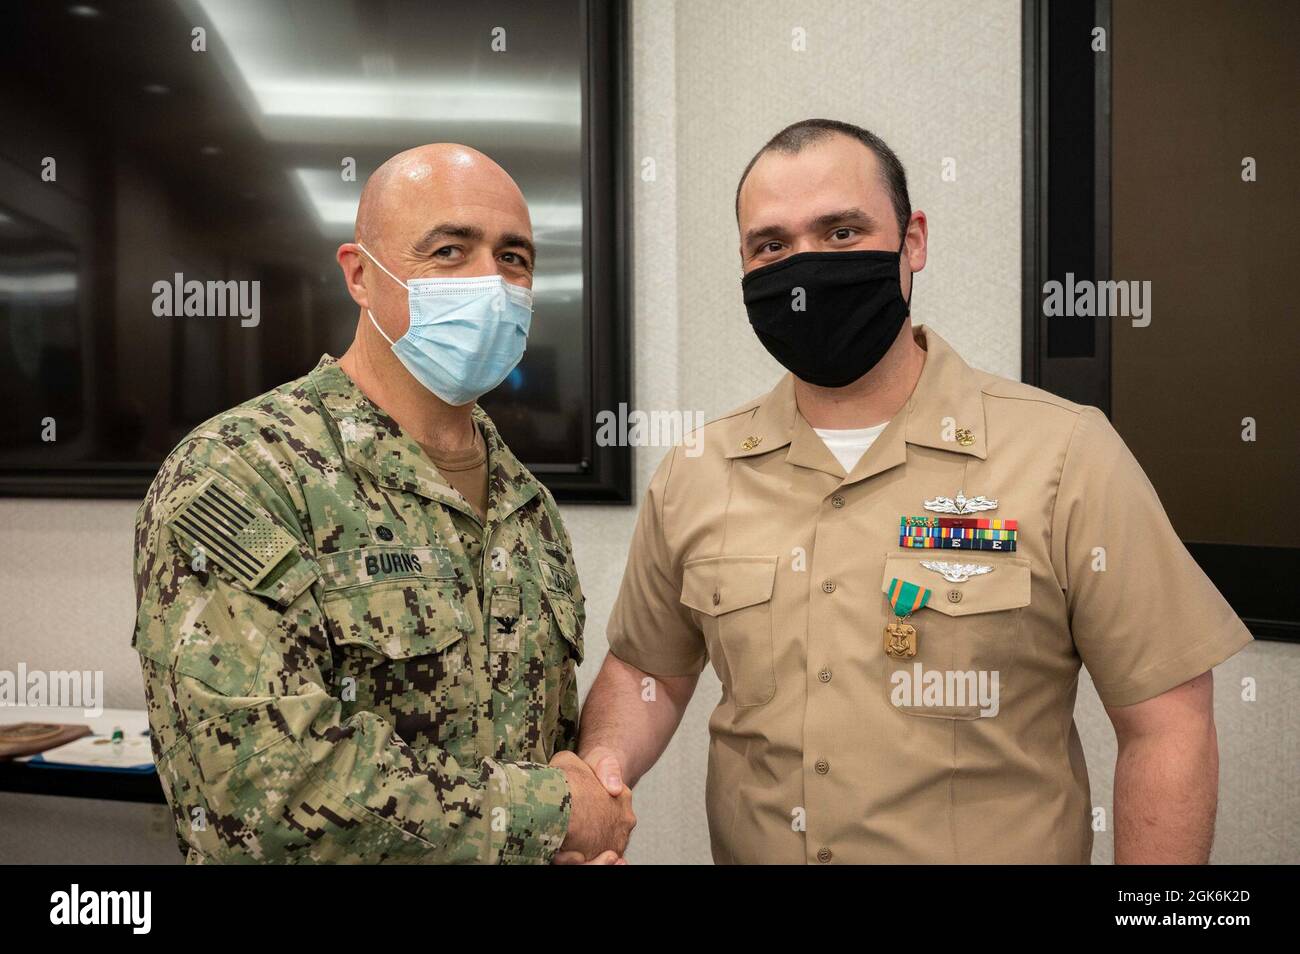 WASHINGTON, DC (Aug. 16, 2021) – Capt. Mark Burns (left), Naval Support Activity Washington commanding officer, presents Chief Fire Controlman Kyle Gregory (right) with a Navy and Marine Corps achievement medal during an award ceremony held onboard Washington Navy Yard. Stock Photo